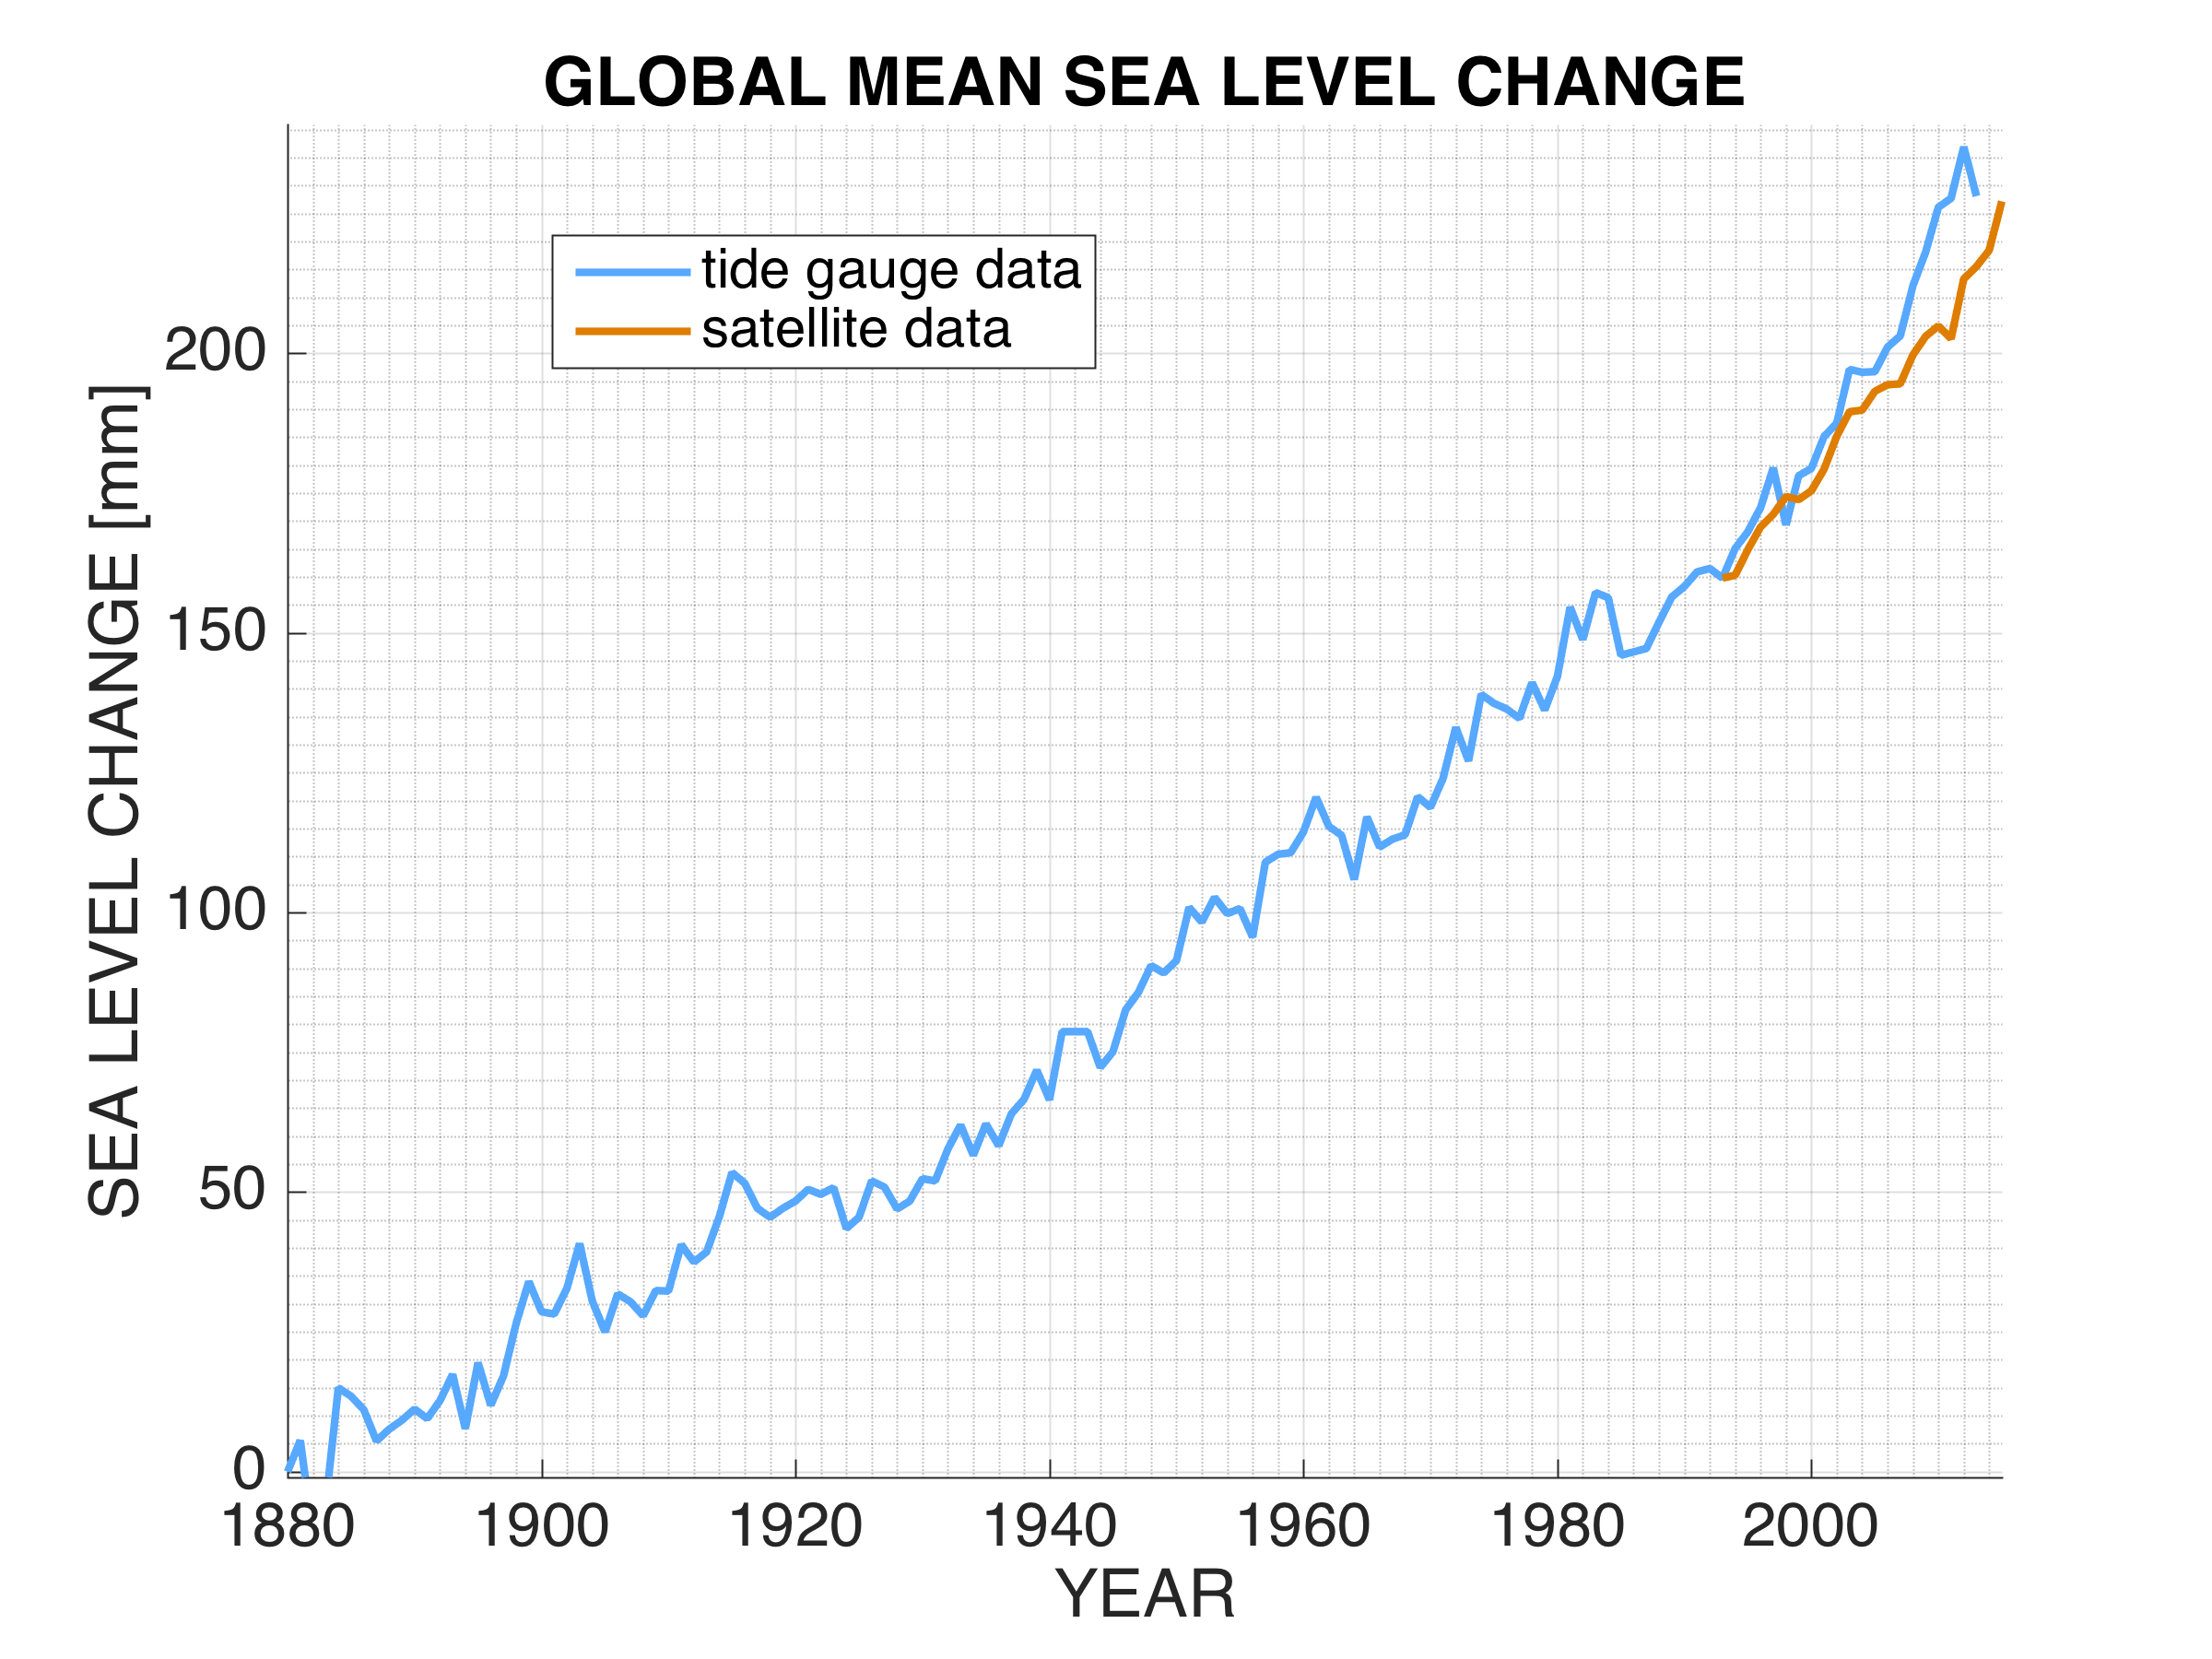 Sea level observations